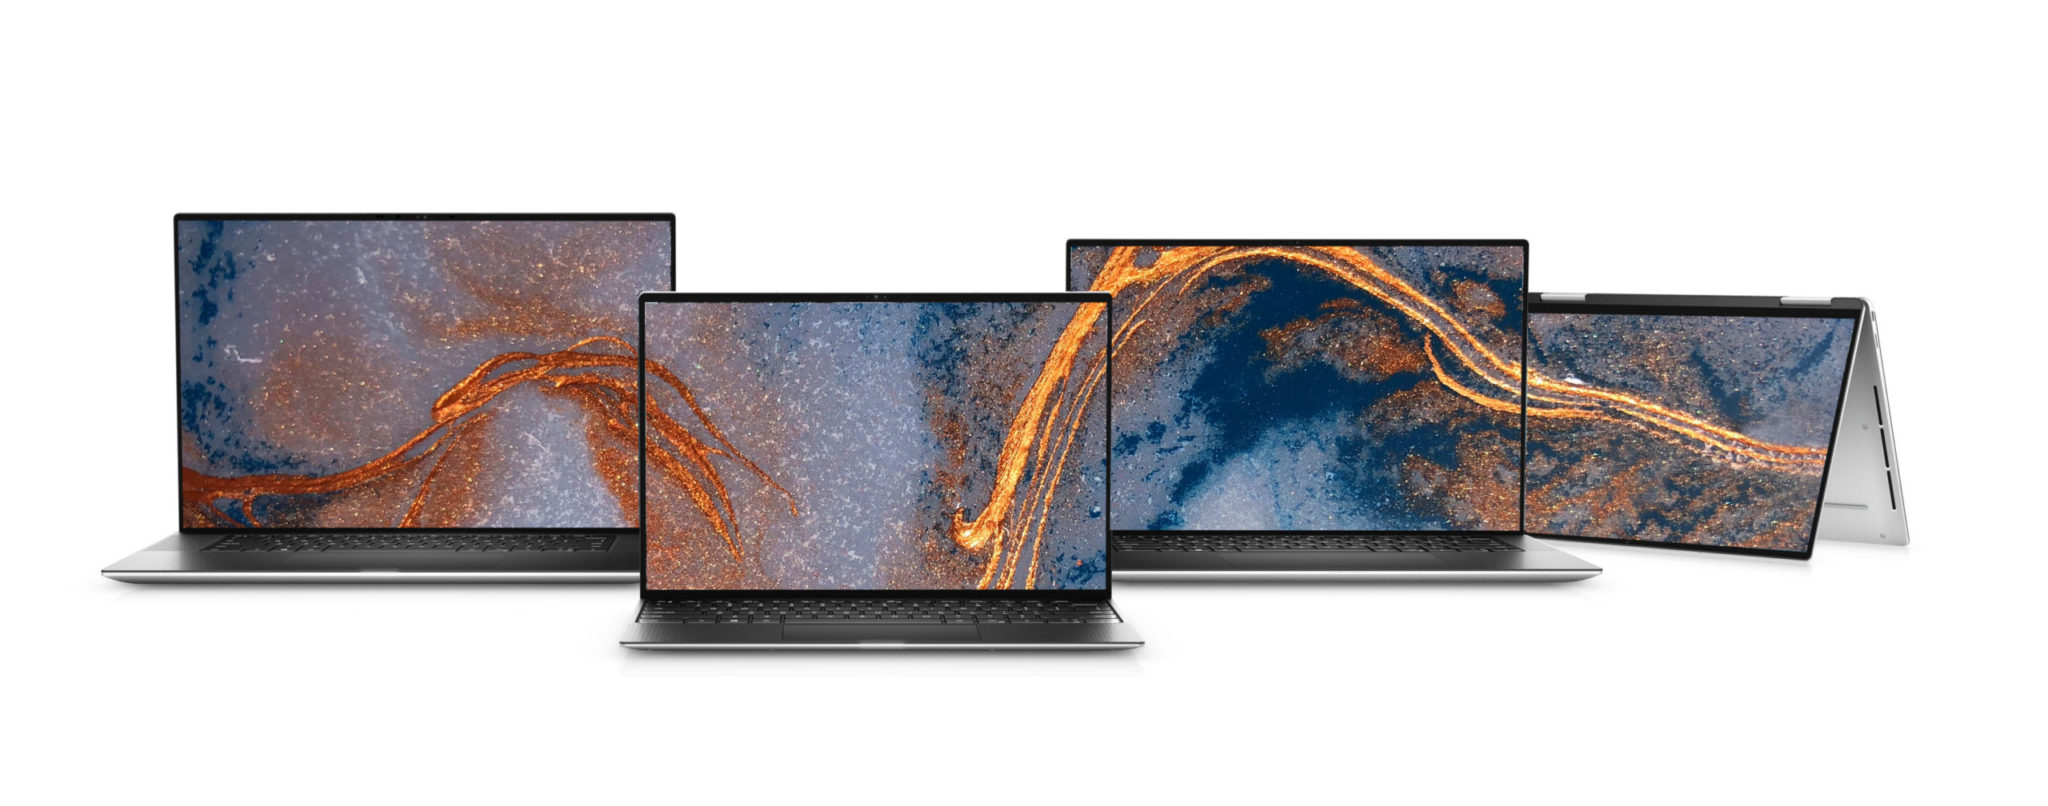 Dell introduces redesigned XPS 15 and XPS 17